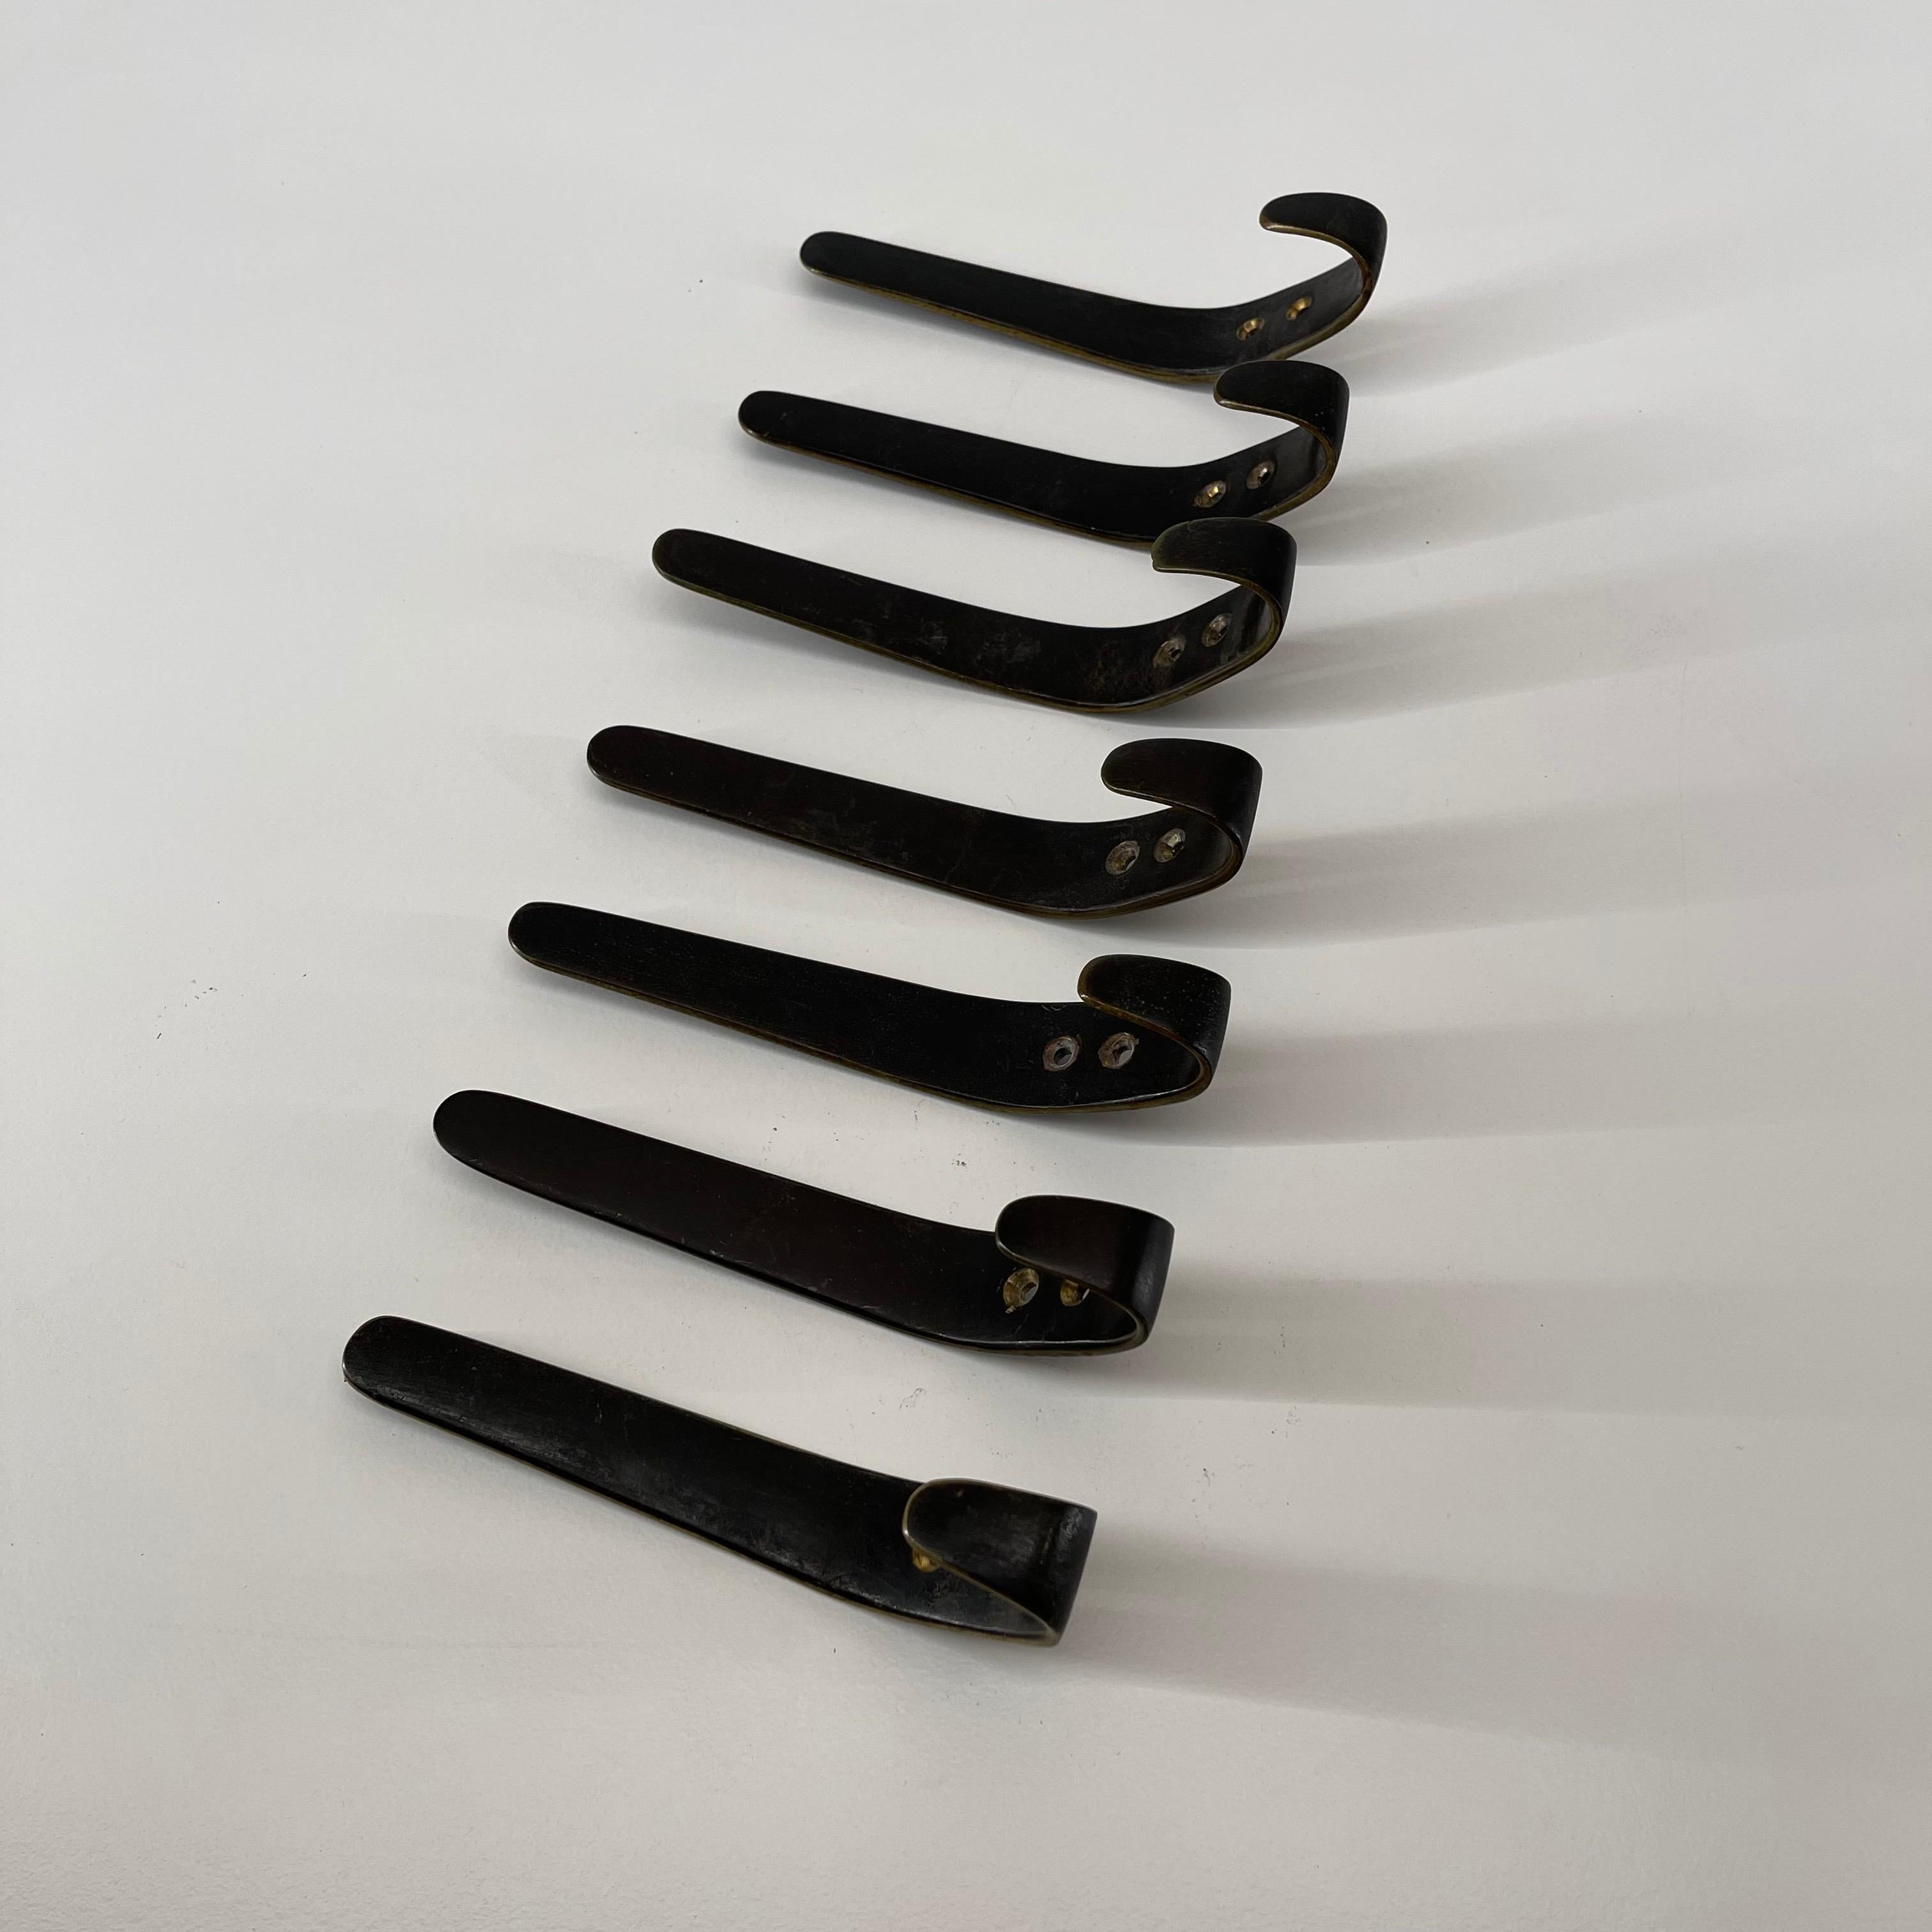 Blackened Carl Auböck II Patinated Brass Hooks 7 Pieces Available, Austria 1950s